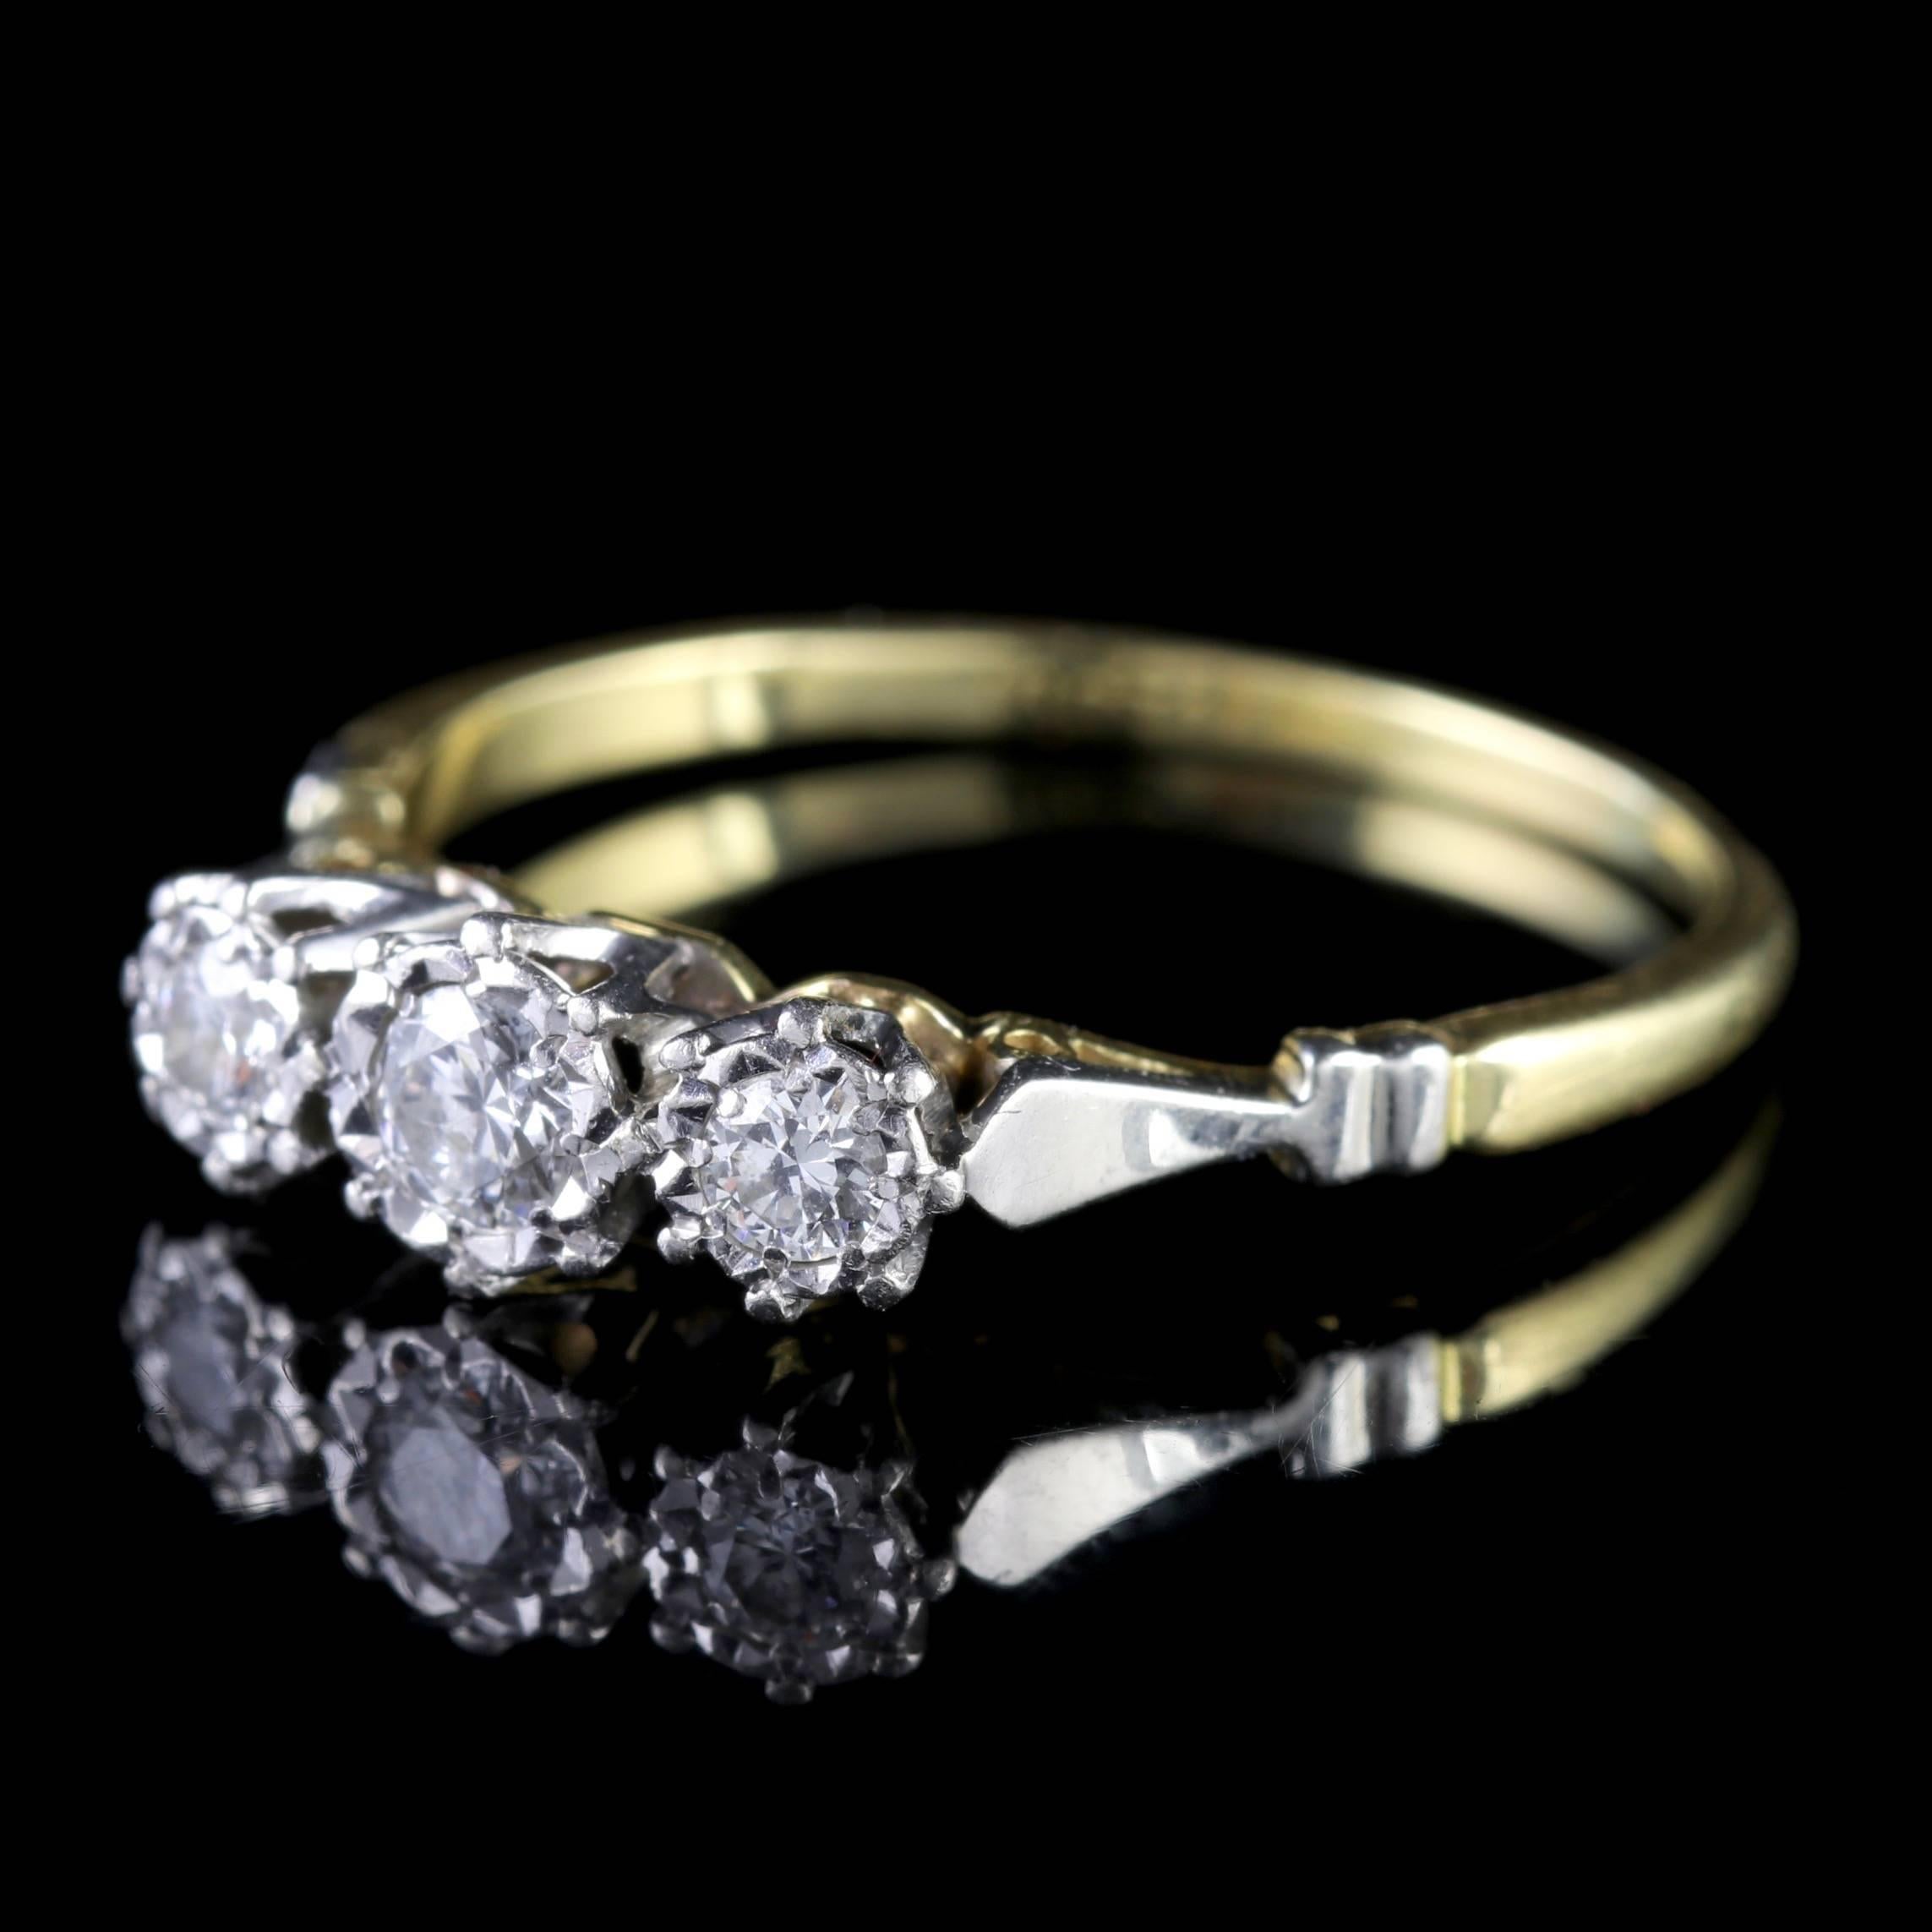 To read more please click continue reading below-

This fabulous antique 18ct Yellow Gold and Platinum Edwardian Diamond trilogy ring is Circa 1910.

A Trilogy of stones represents past, present and future Or those 3 little words - I love you.

Set